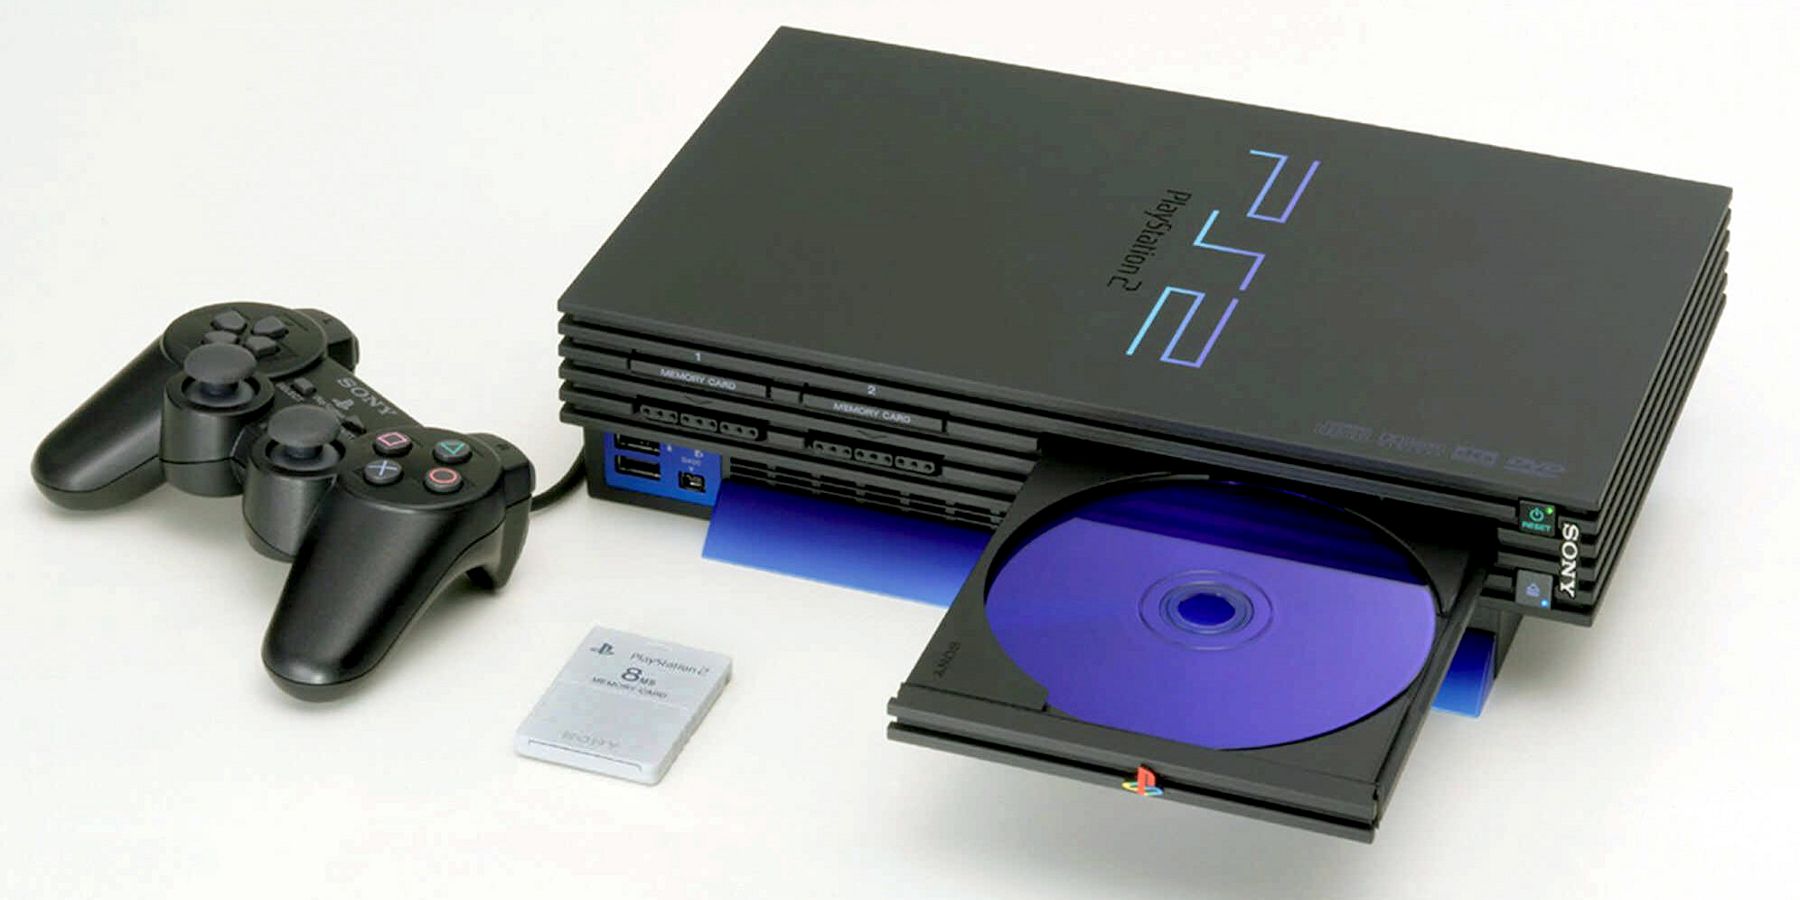 PlayStation 2: Looking Back at the Highest-Selling Console After 20 Years